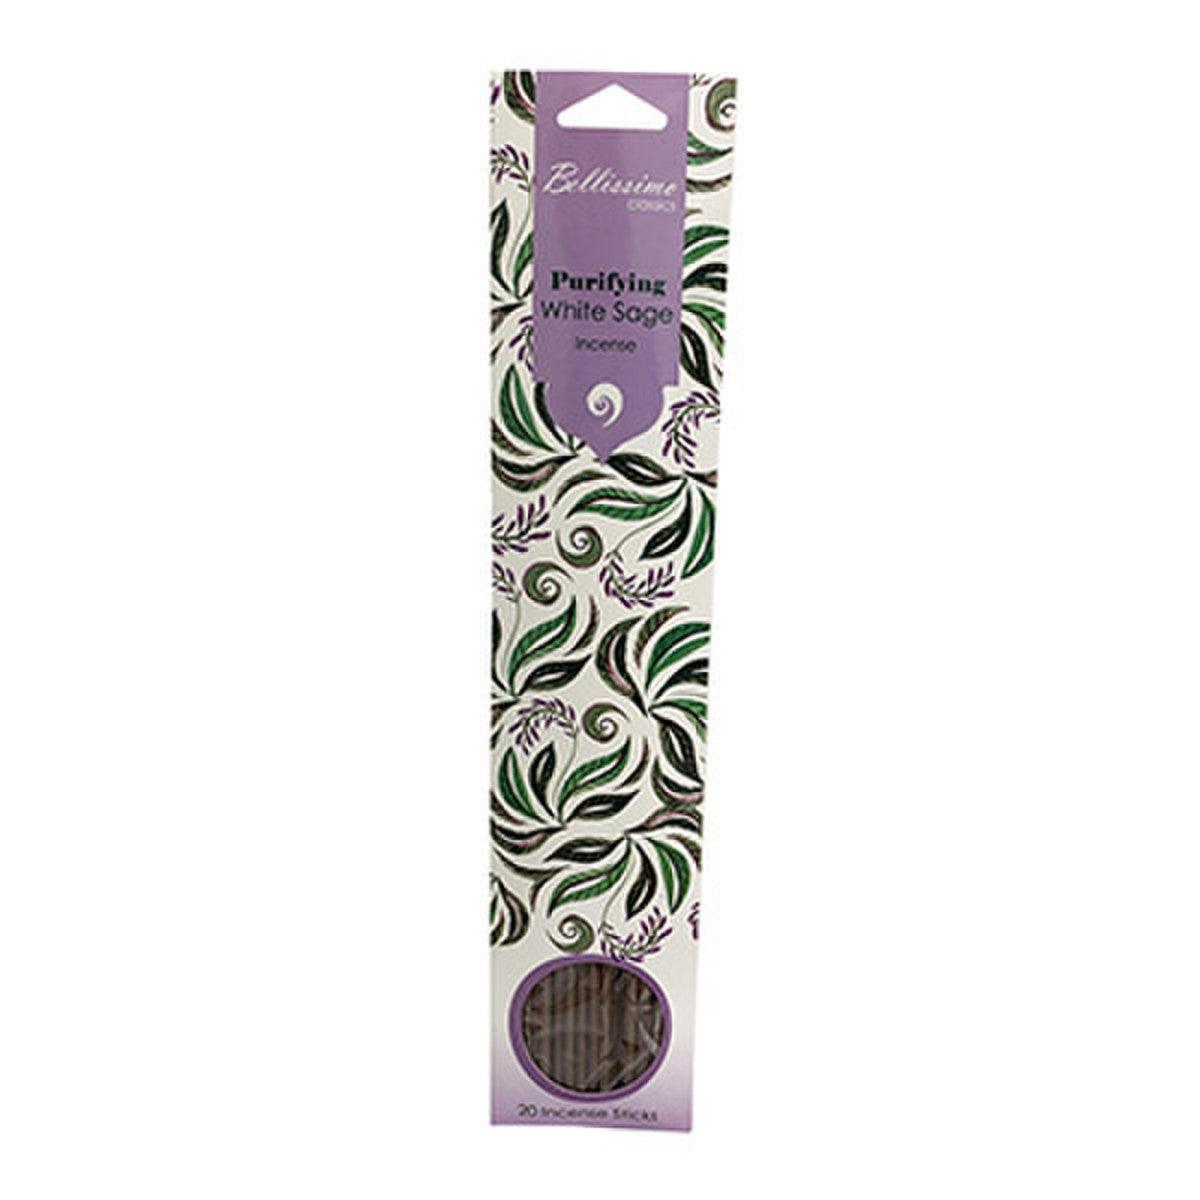 Bellissimo Classics White Sage Incense Pack of 20 - Inspire Me Naturally 